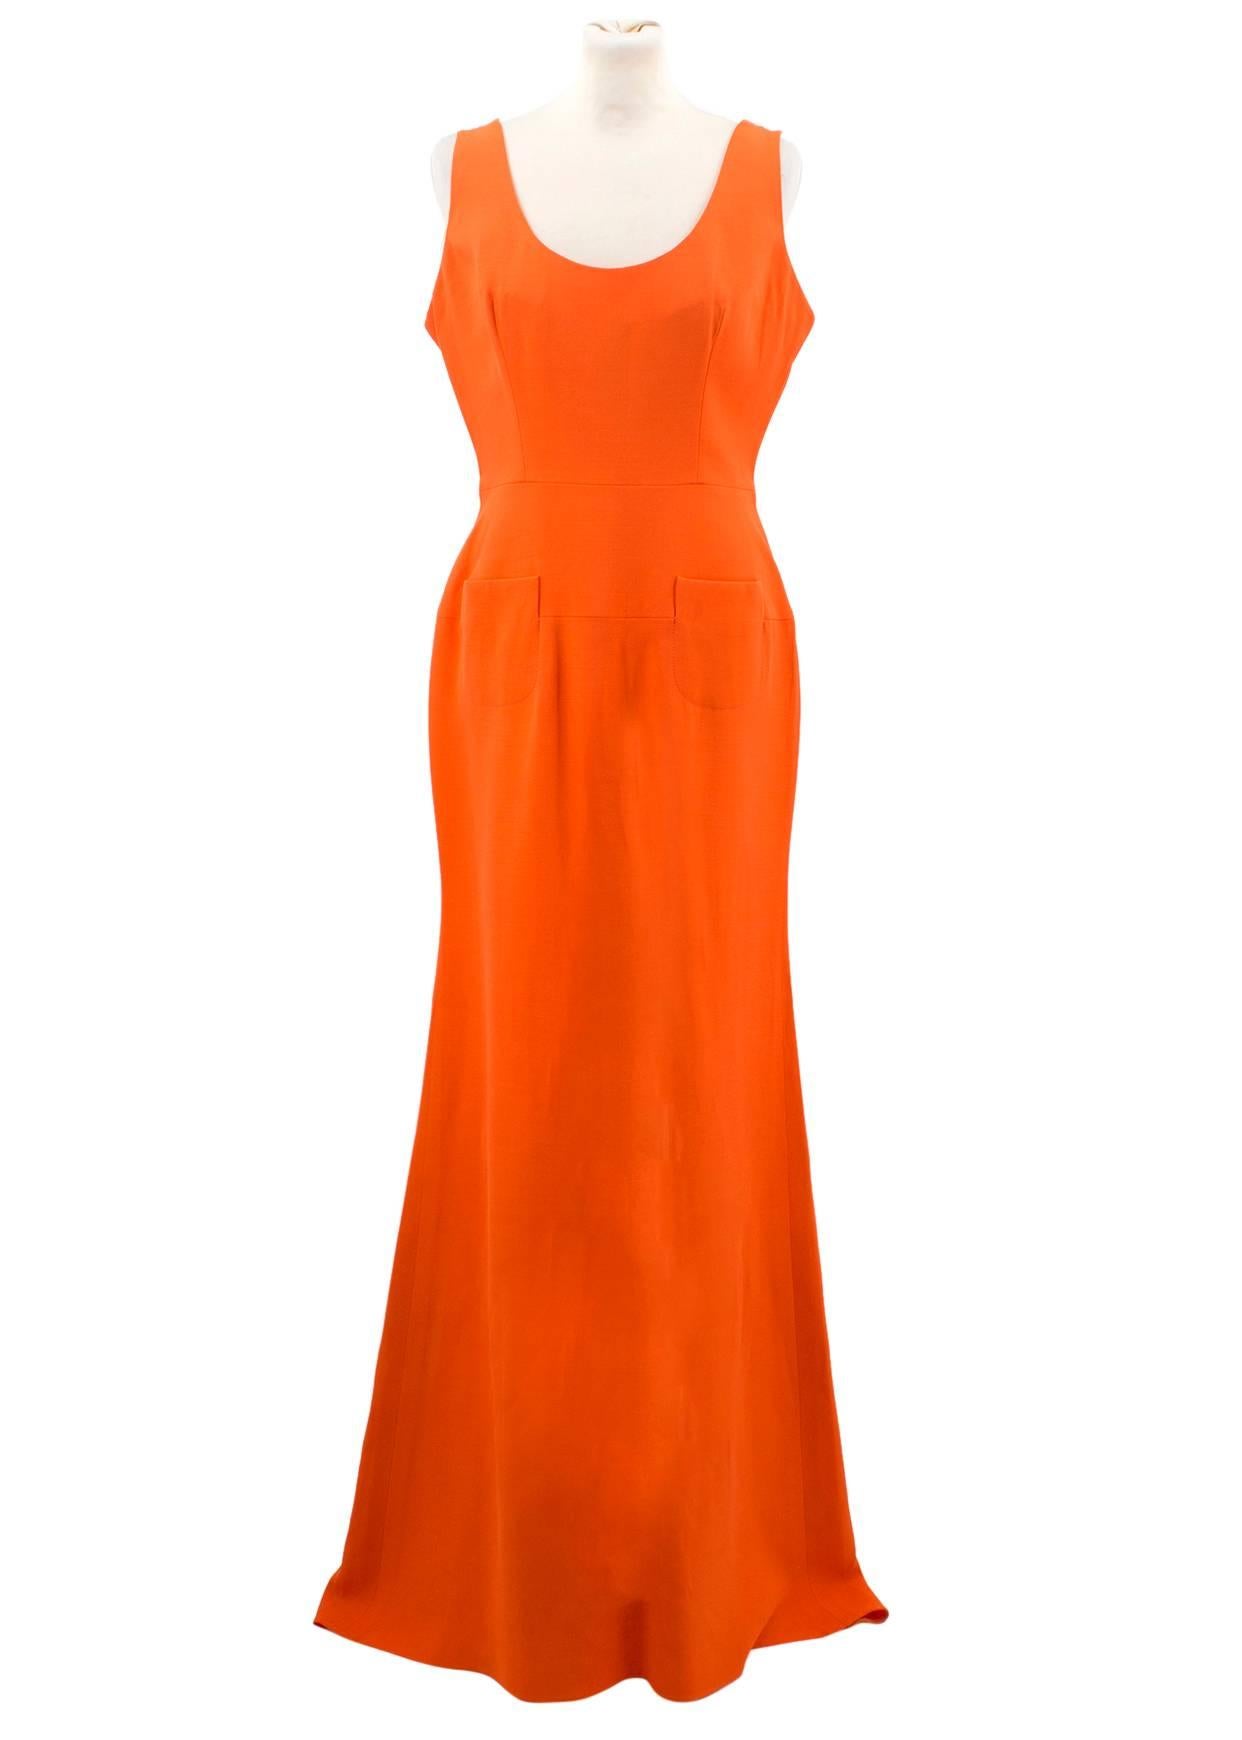 Victoria Beckham Tangerine Double Crepe Scoop Neck Floorlength gown. 

Made in England. 

SS12. 
Double Crepe. 
Scoop neck floorlength.

Features a scoop neckline, grey shoulder straps, two front pockets and a concealed zip at back of the dress.